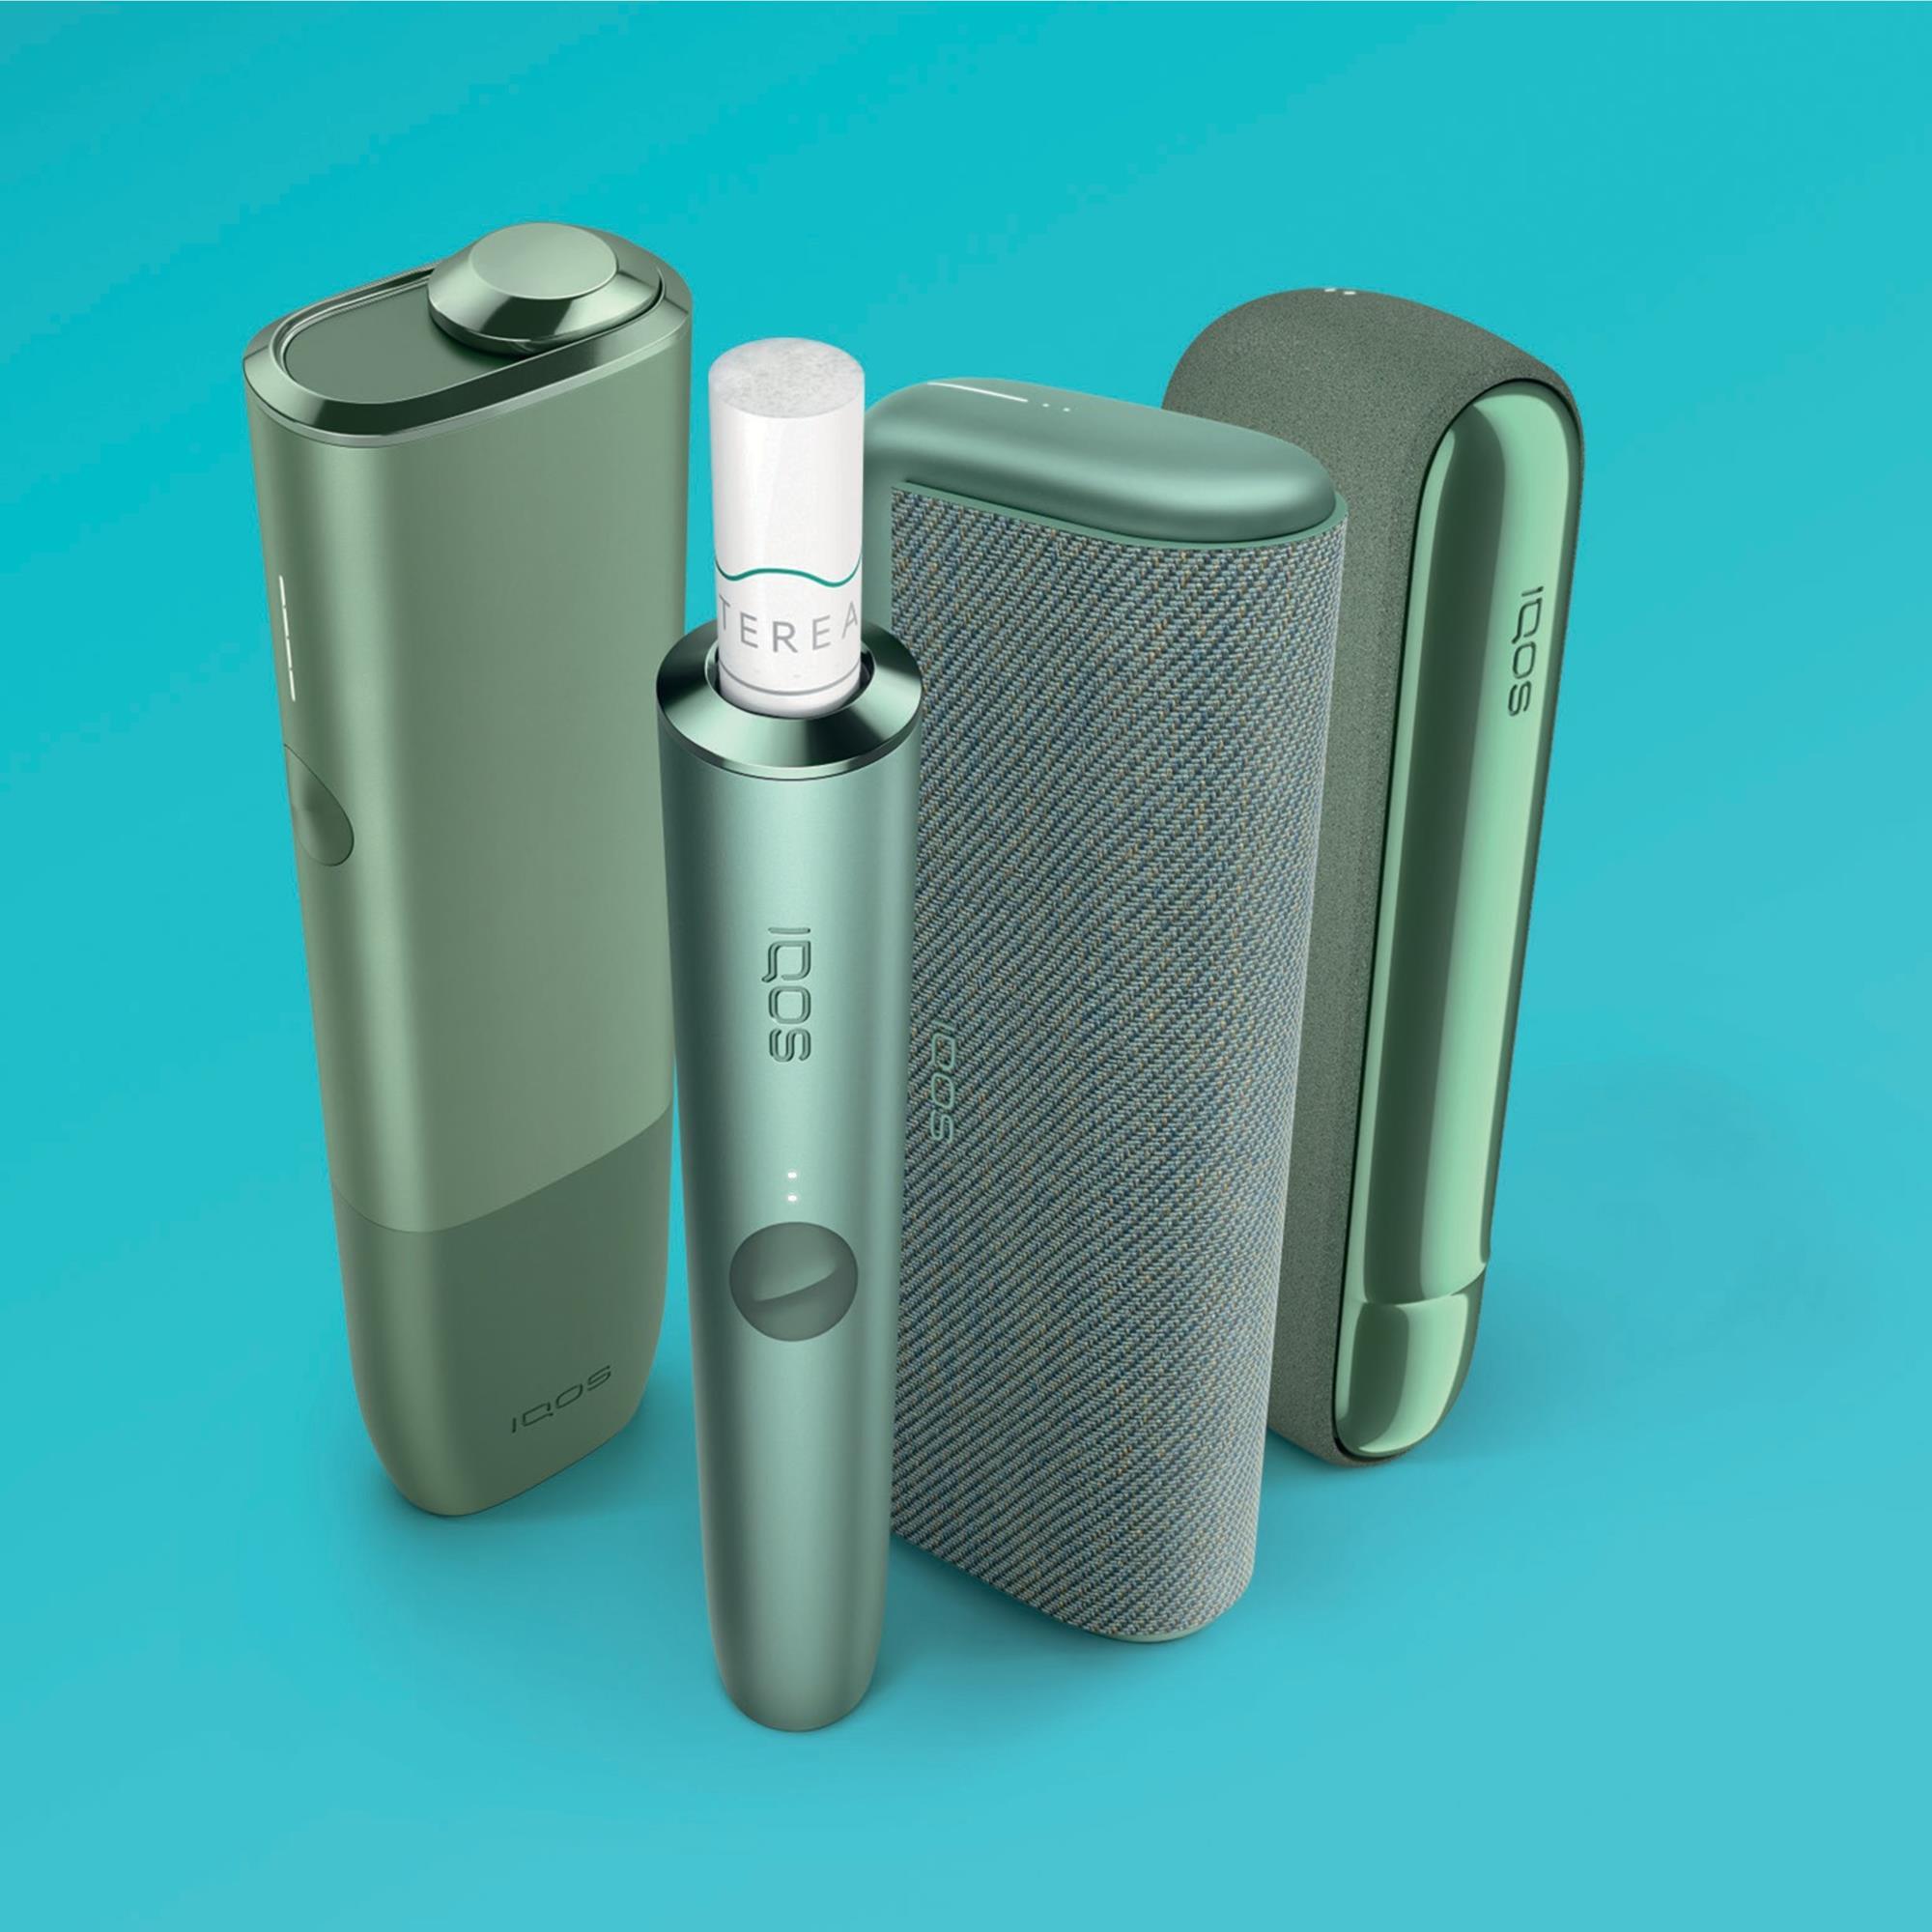 Philip Morris is Getting Ready to Launch IQOS in the US - Vaping Post